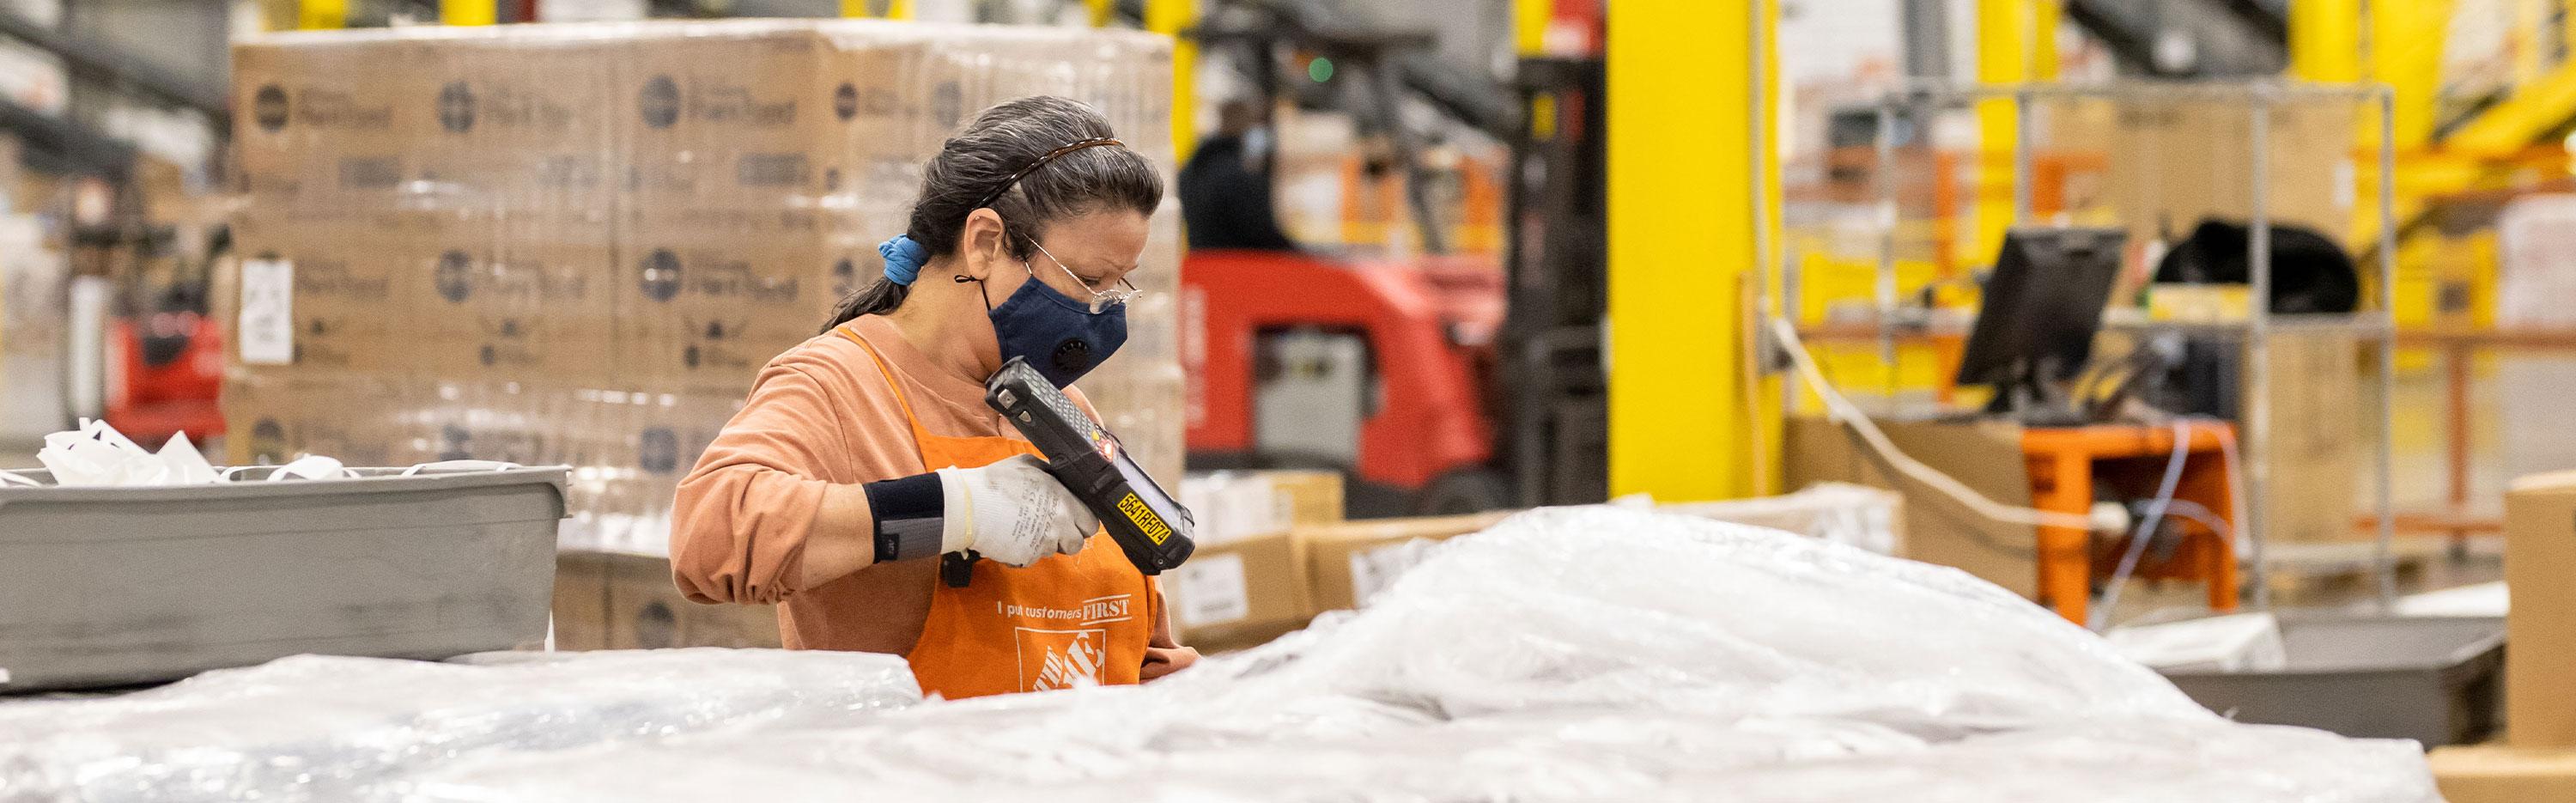 New type of distribution center is a first for Home Depot